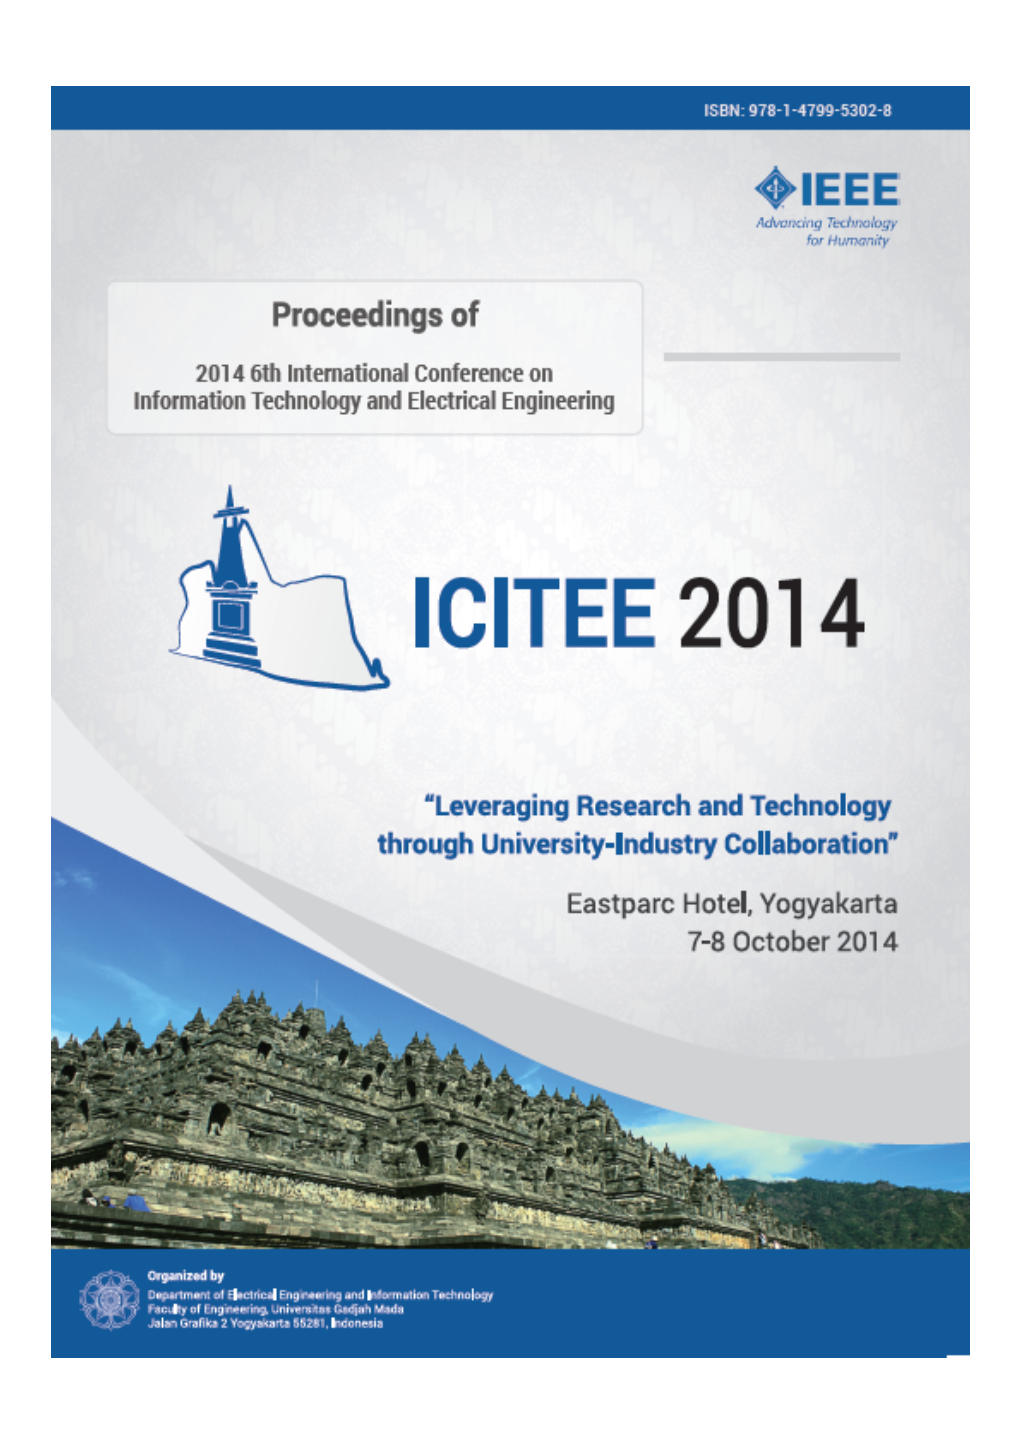 2014 6Th International Conference on Information Technology and Electrical Engineering